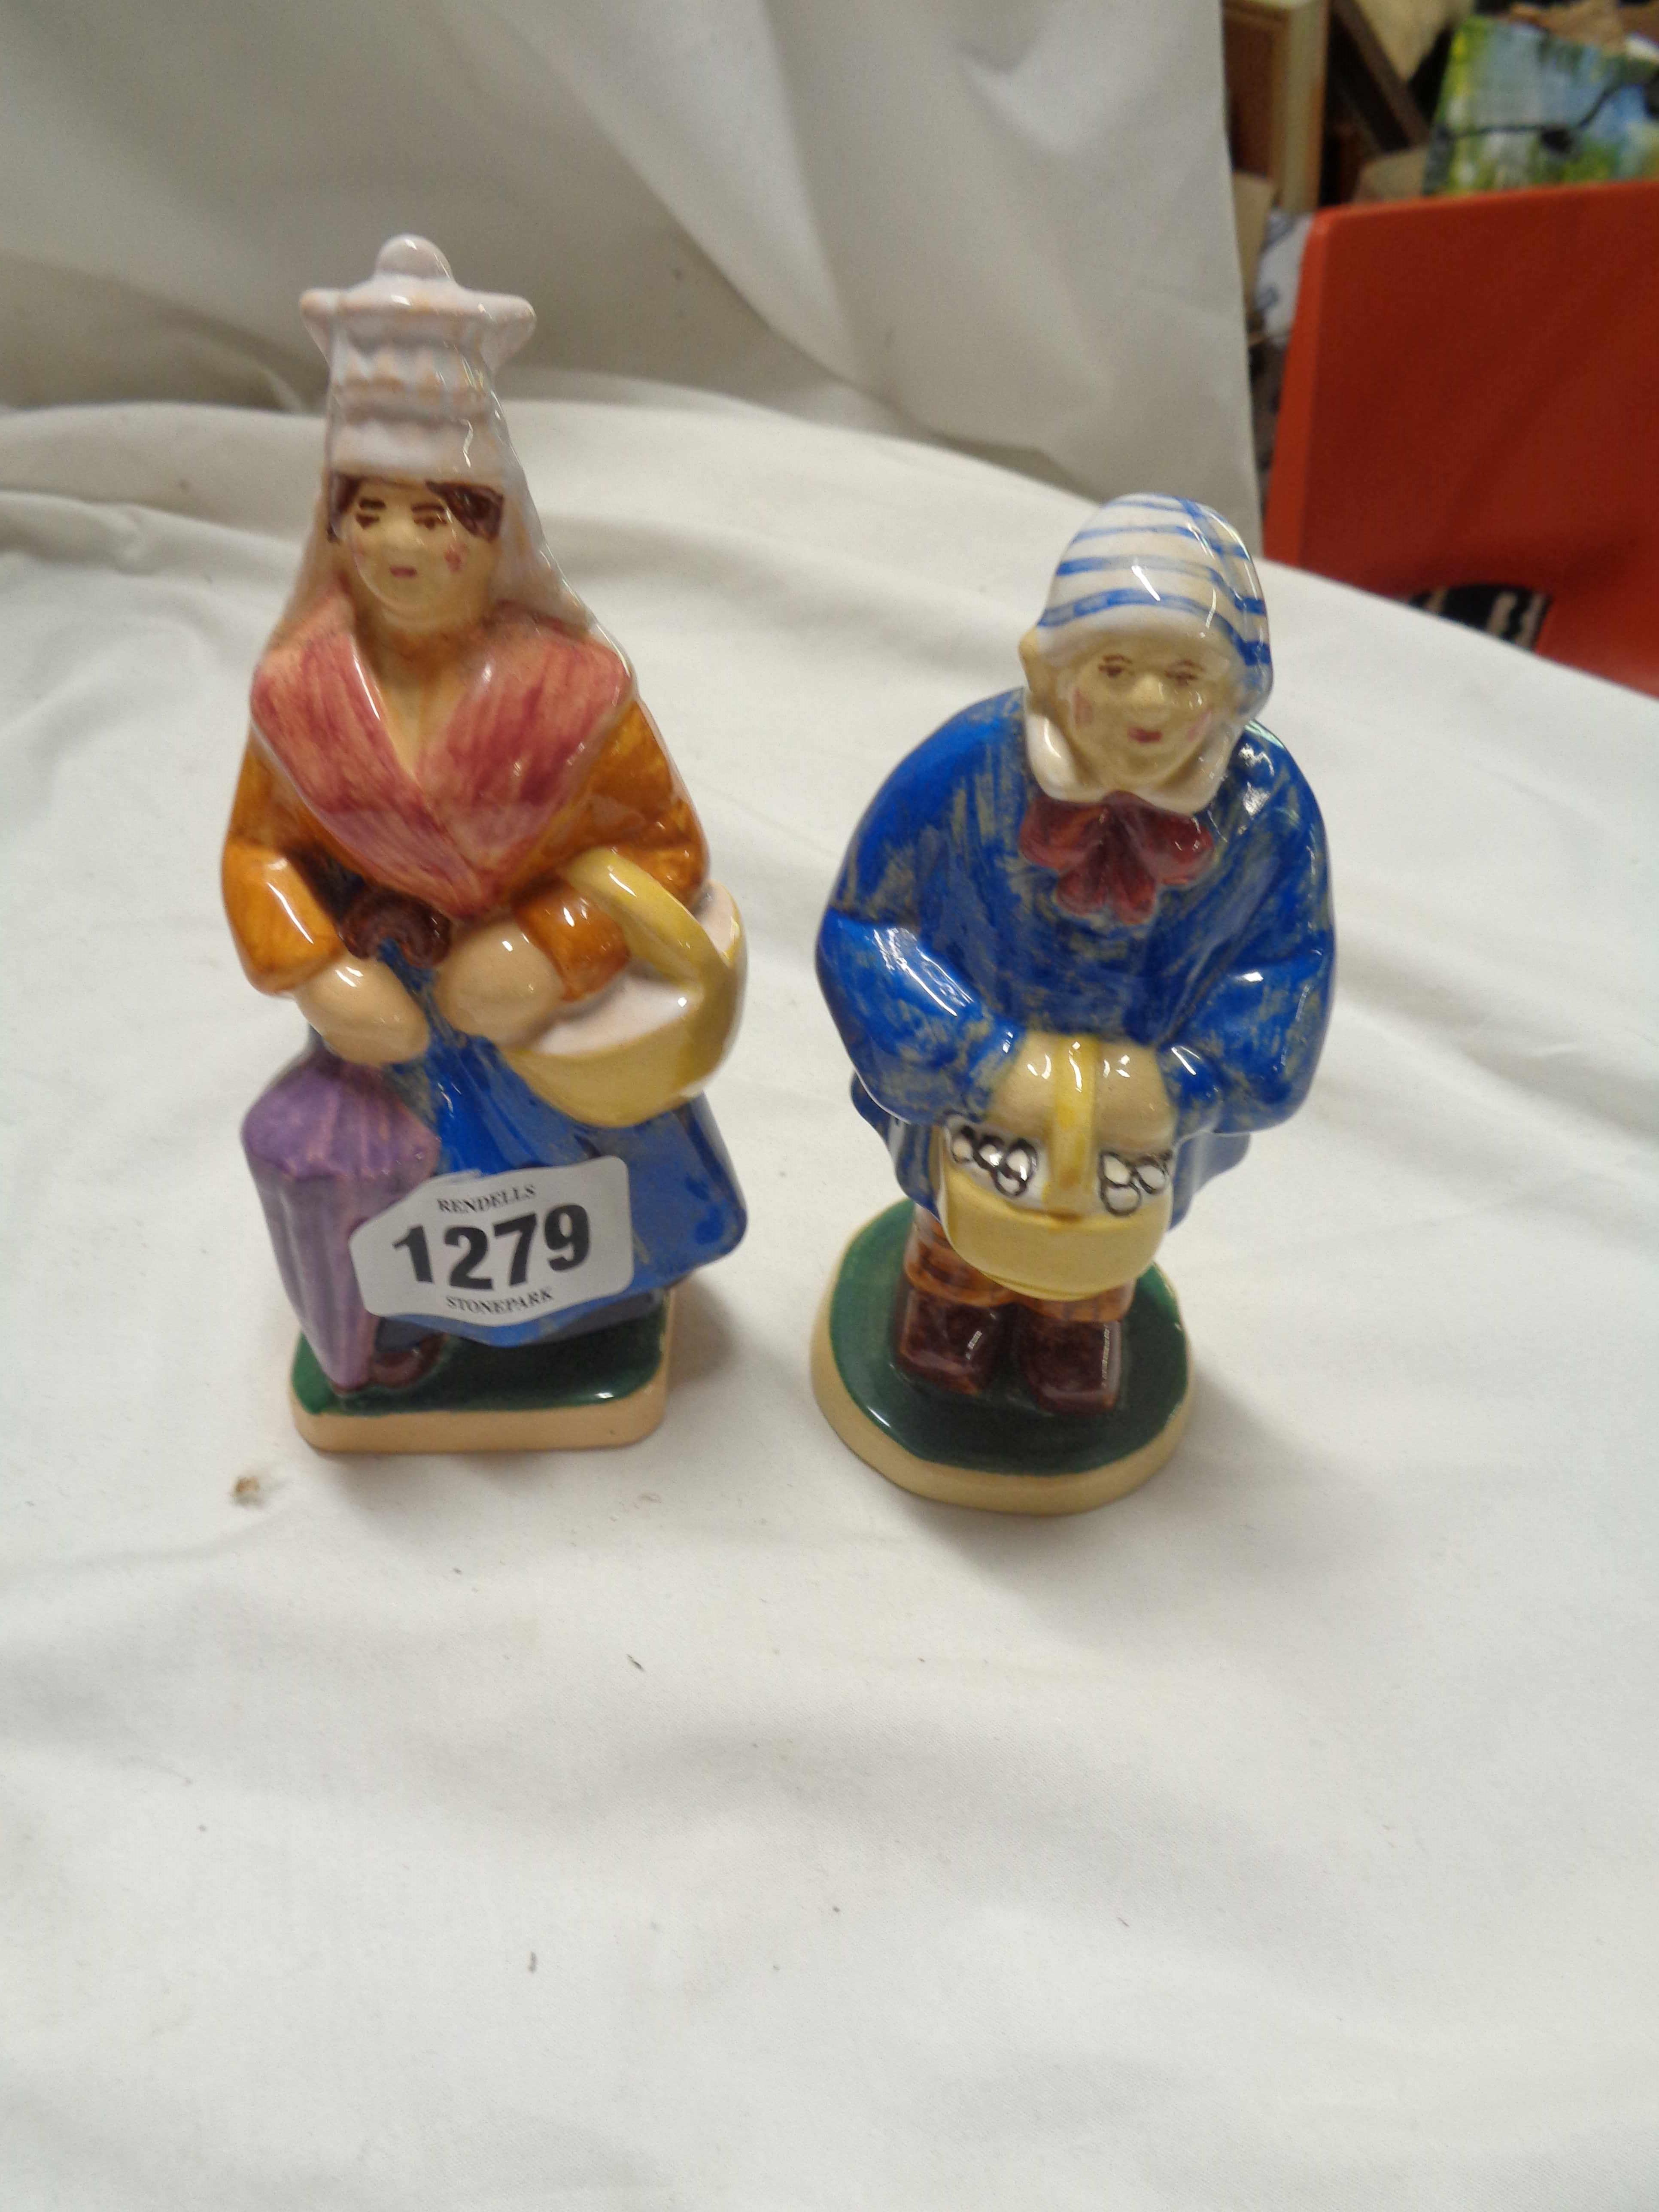 A pair of vintage French Normandie pottery figures, depicting a peasant man and woman off to market